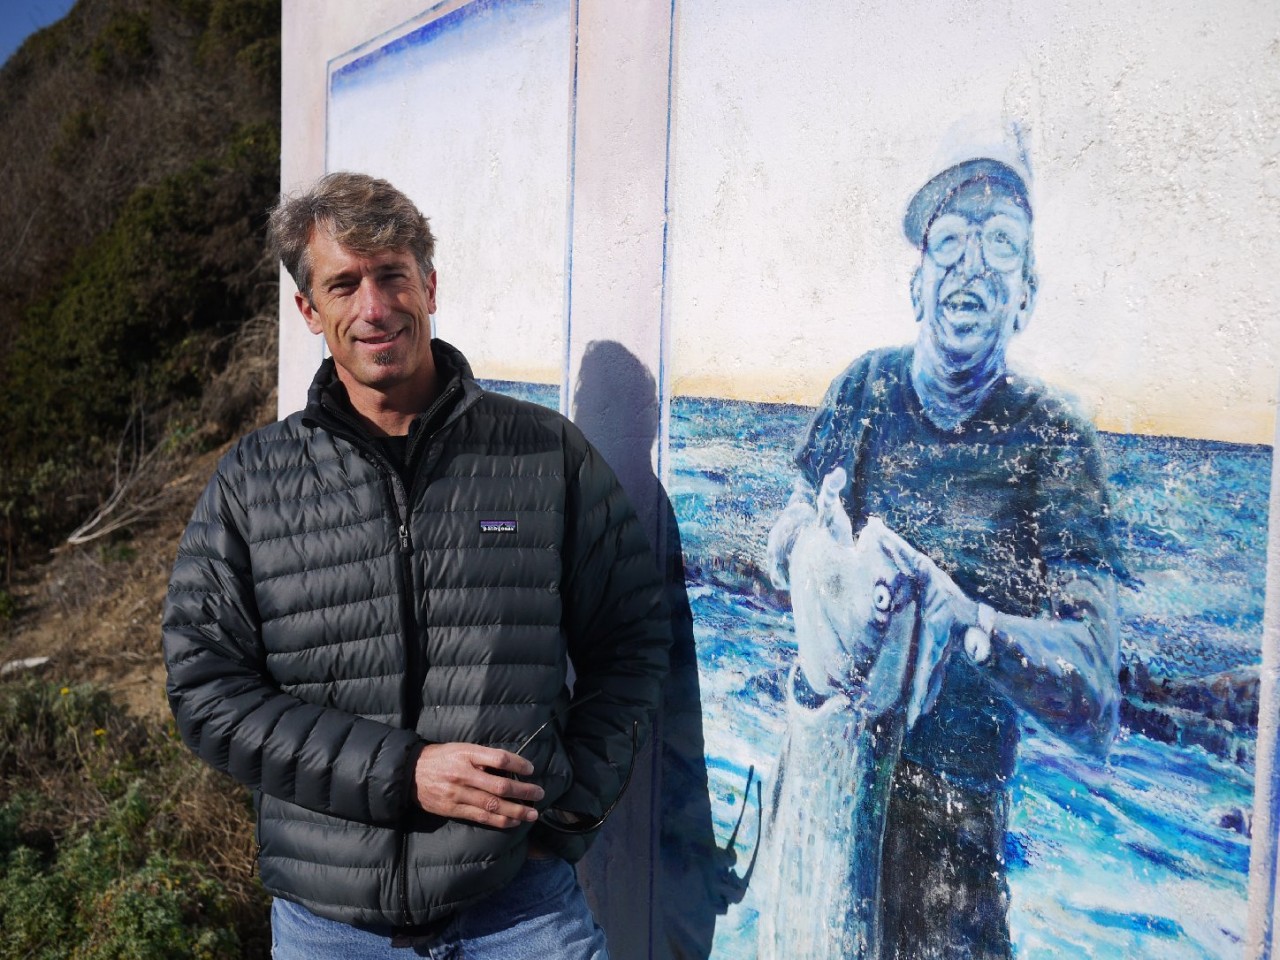 Mike Wallace used to bring his high school surf team to practice at Martins Beach. Here, he stands next to a mural depicting the beach's former owners. (Amy Standen/KQED)